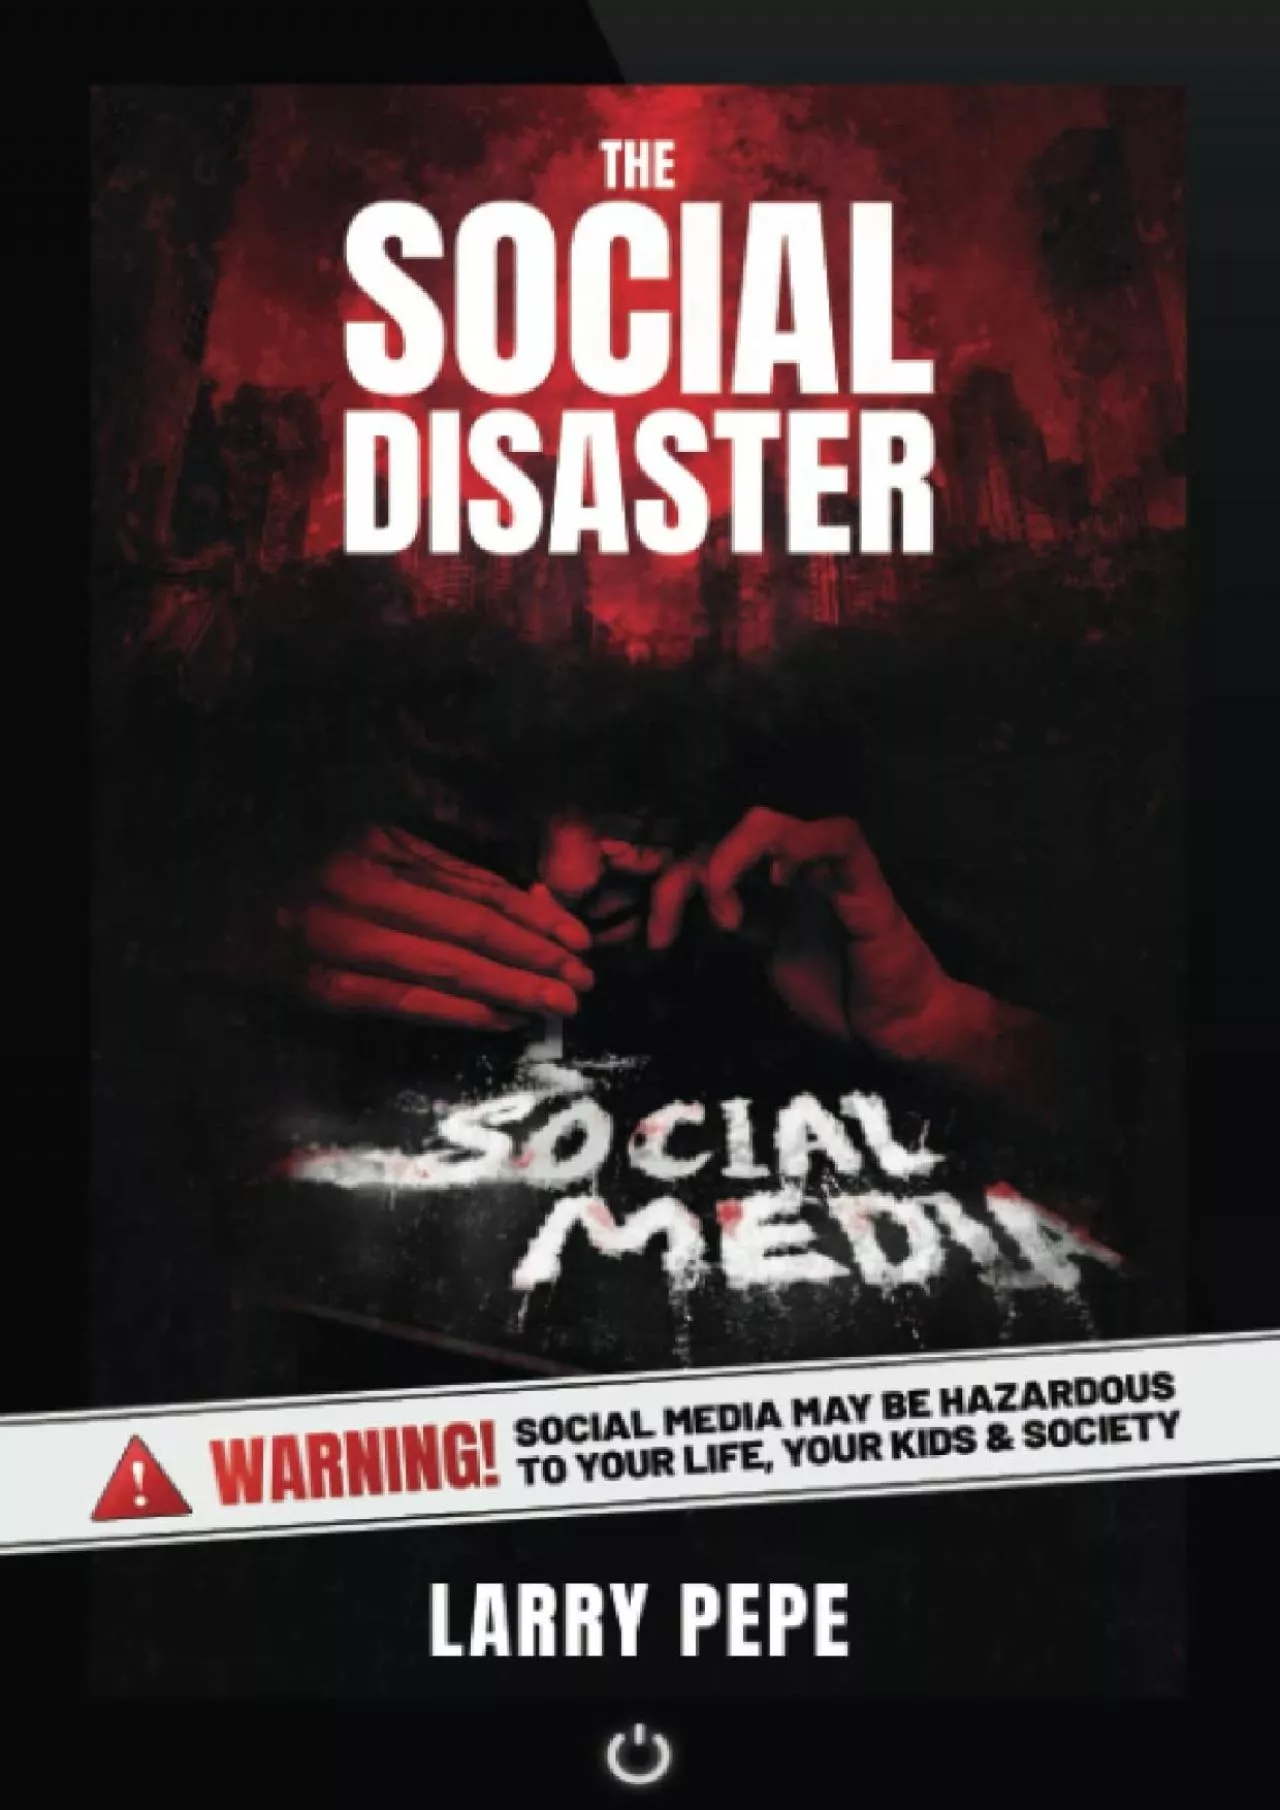 The Social Disaster: Warning Social Media May Be Hazardous To Your Life, Your Kids & Society